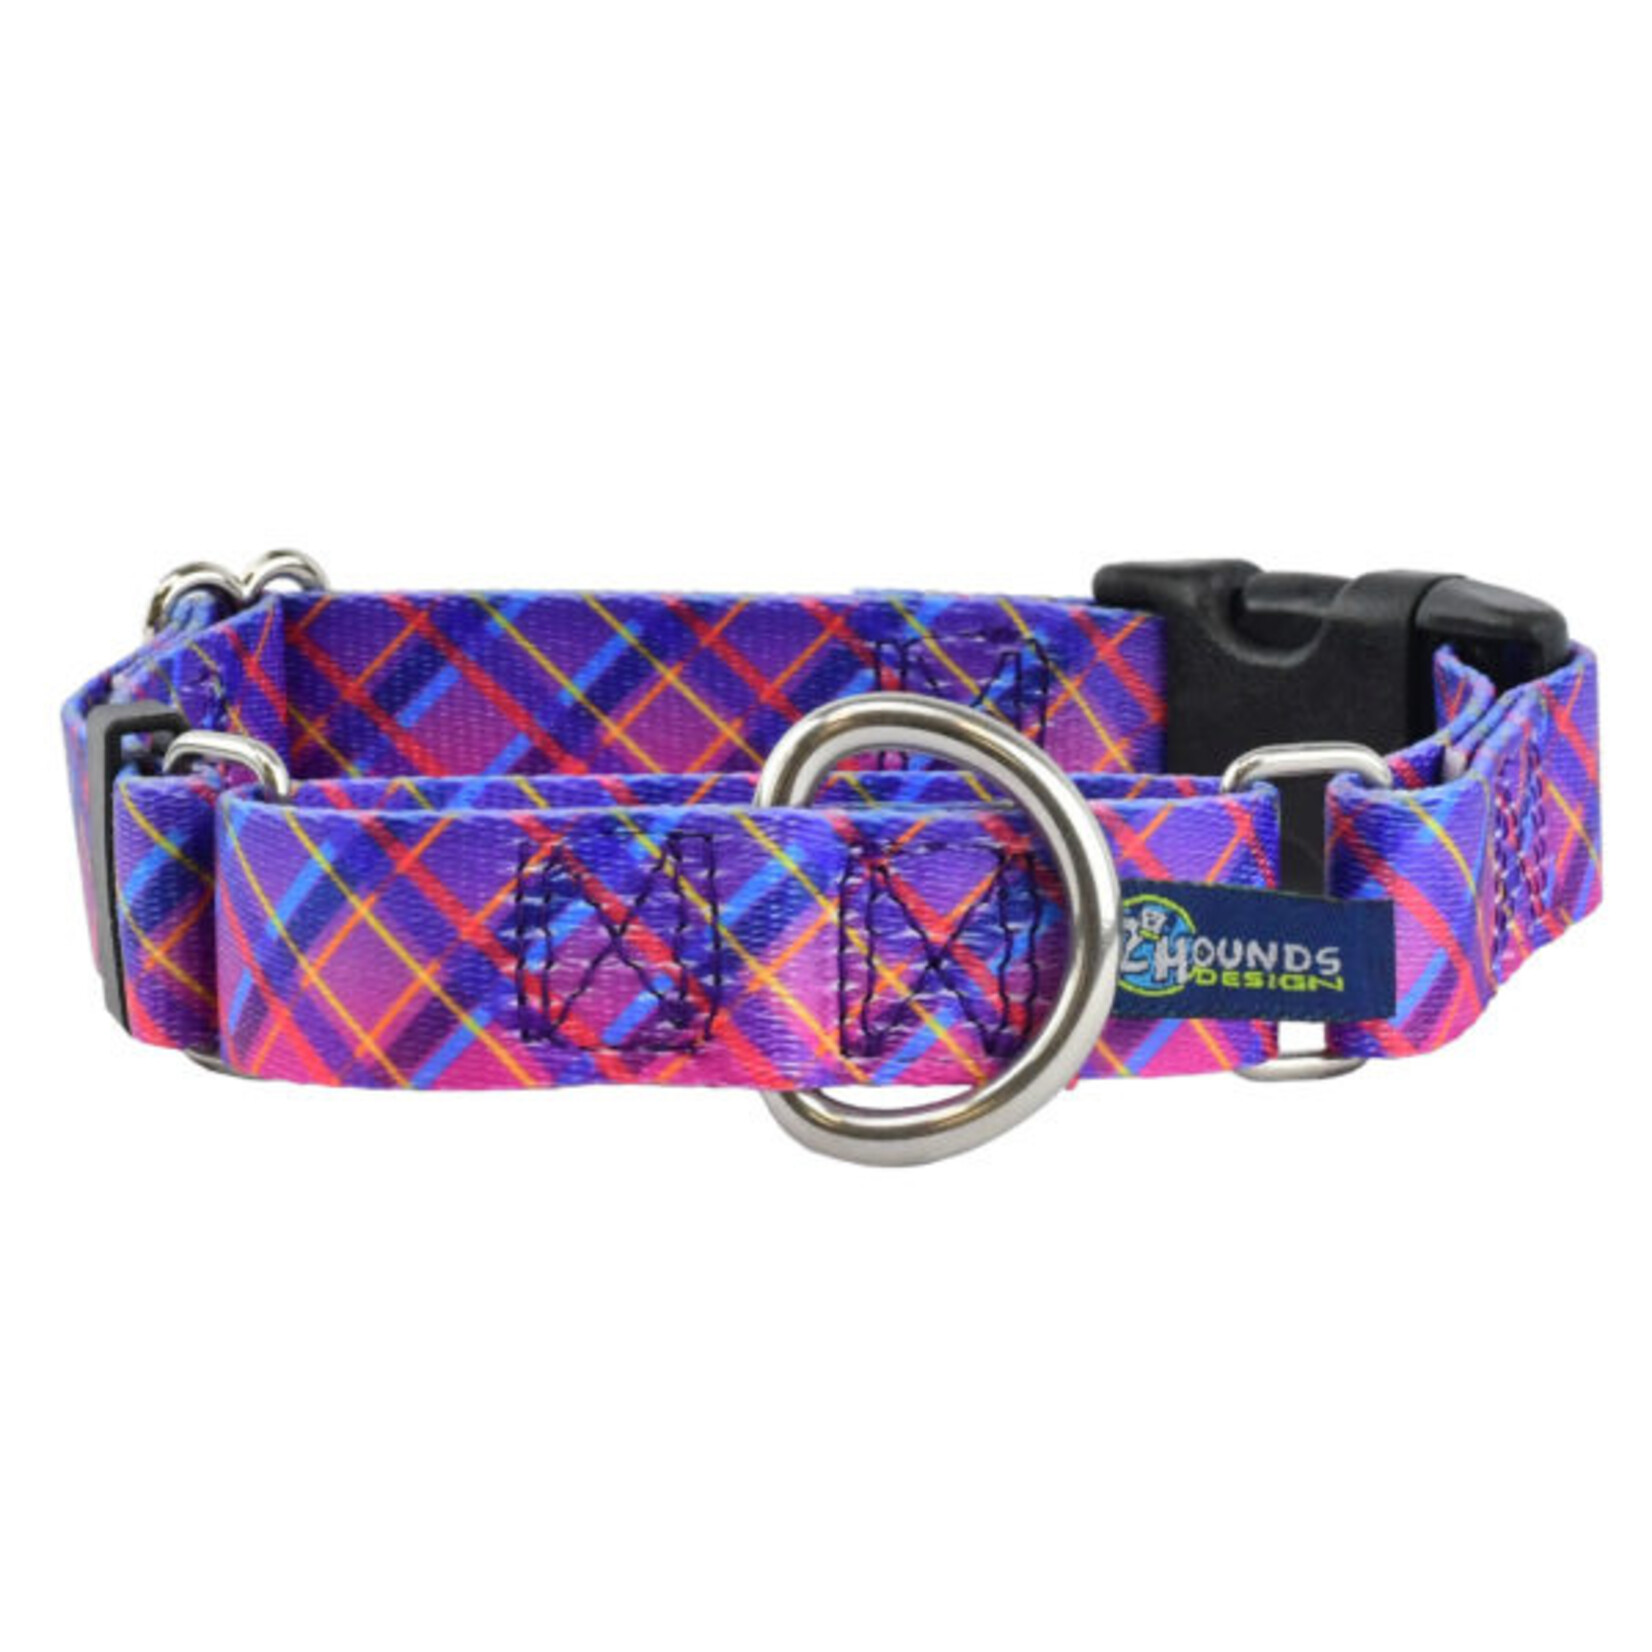 2 Hounds Design 2HOUNDS Martingale w Buckle Collar 1" Dog